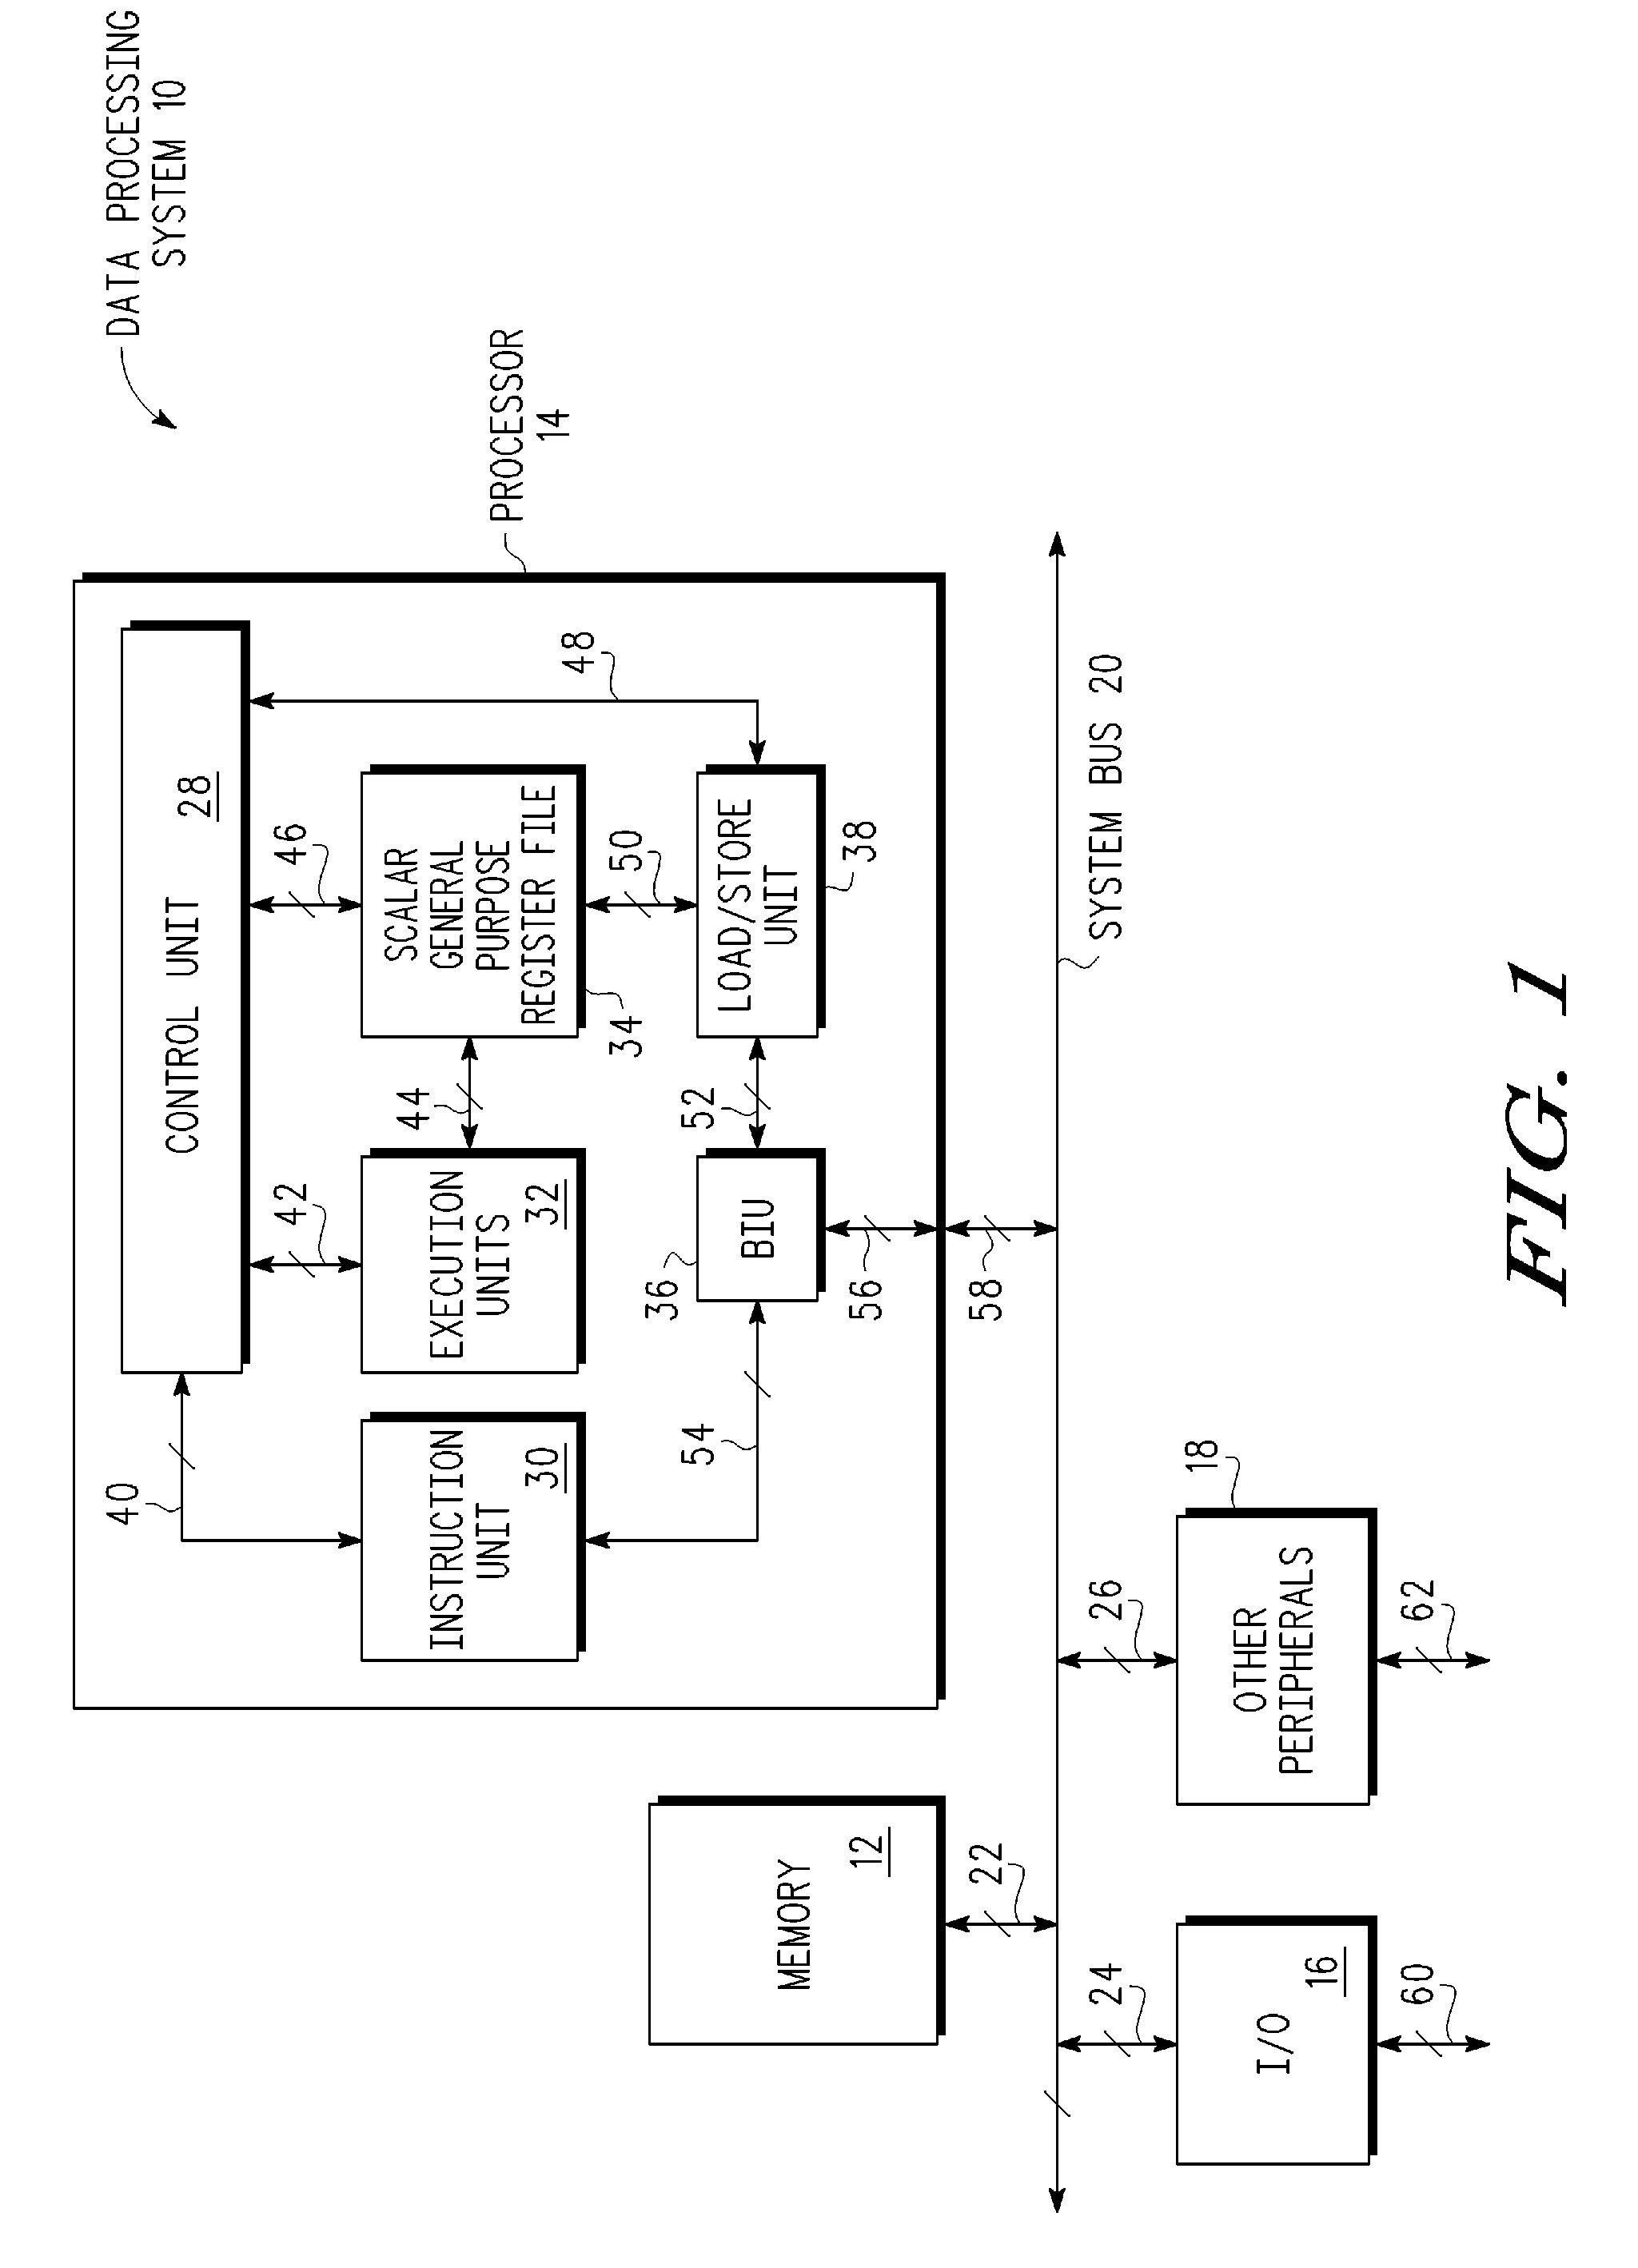 Provision of extended addressing modes in a single instruction multiple data (SIMD) data processor